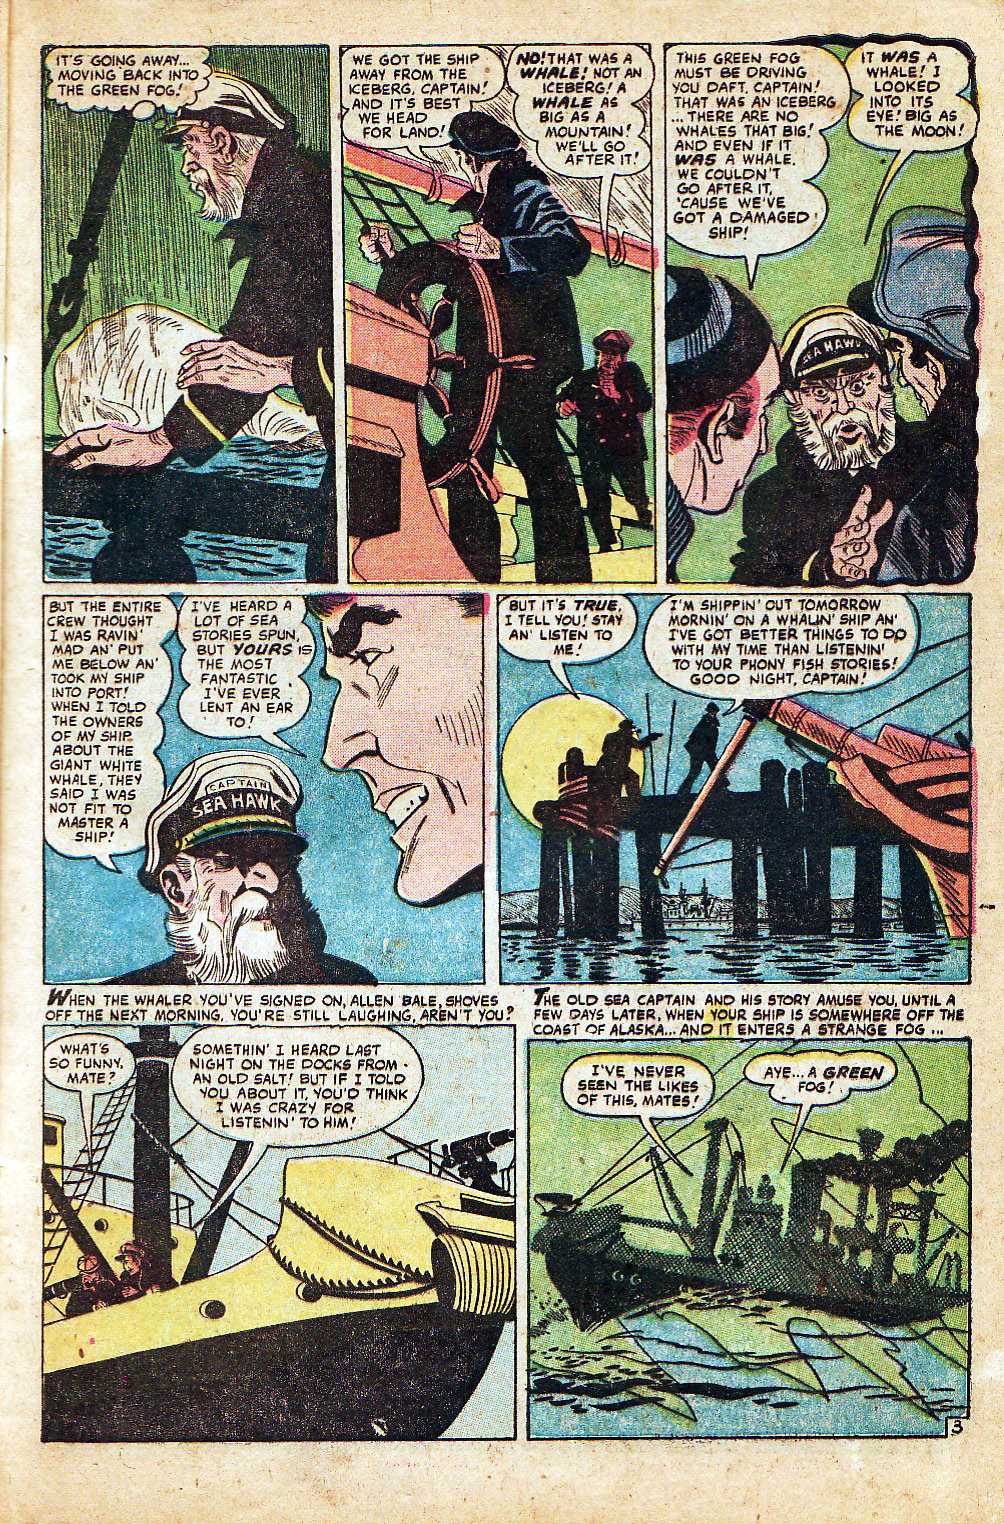 Marvel Tales (1949) 154 Page 4